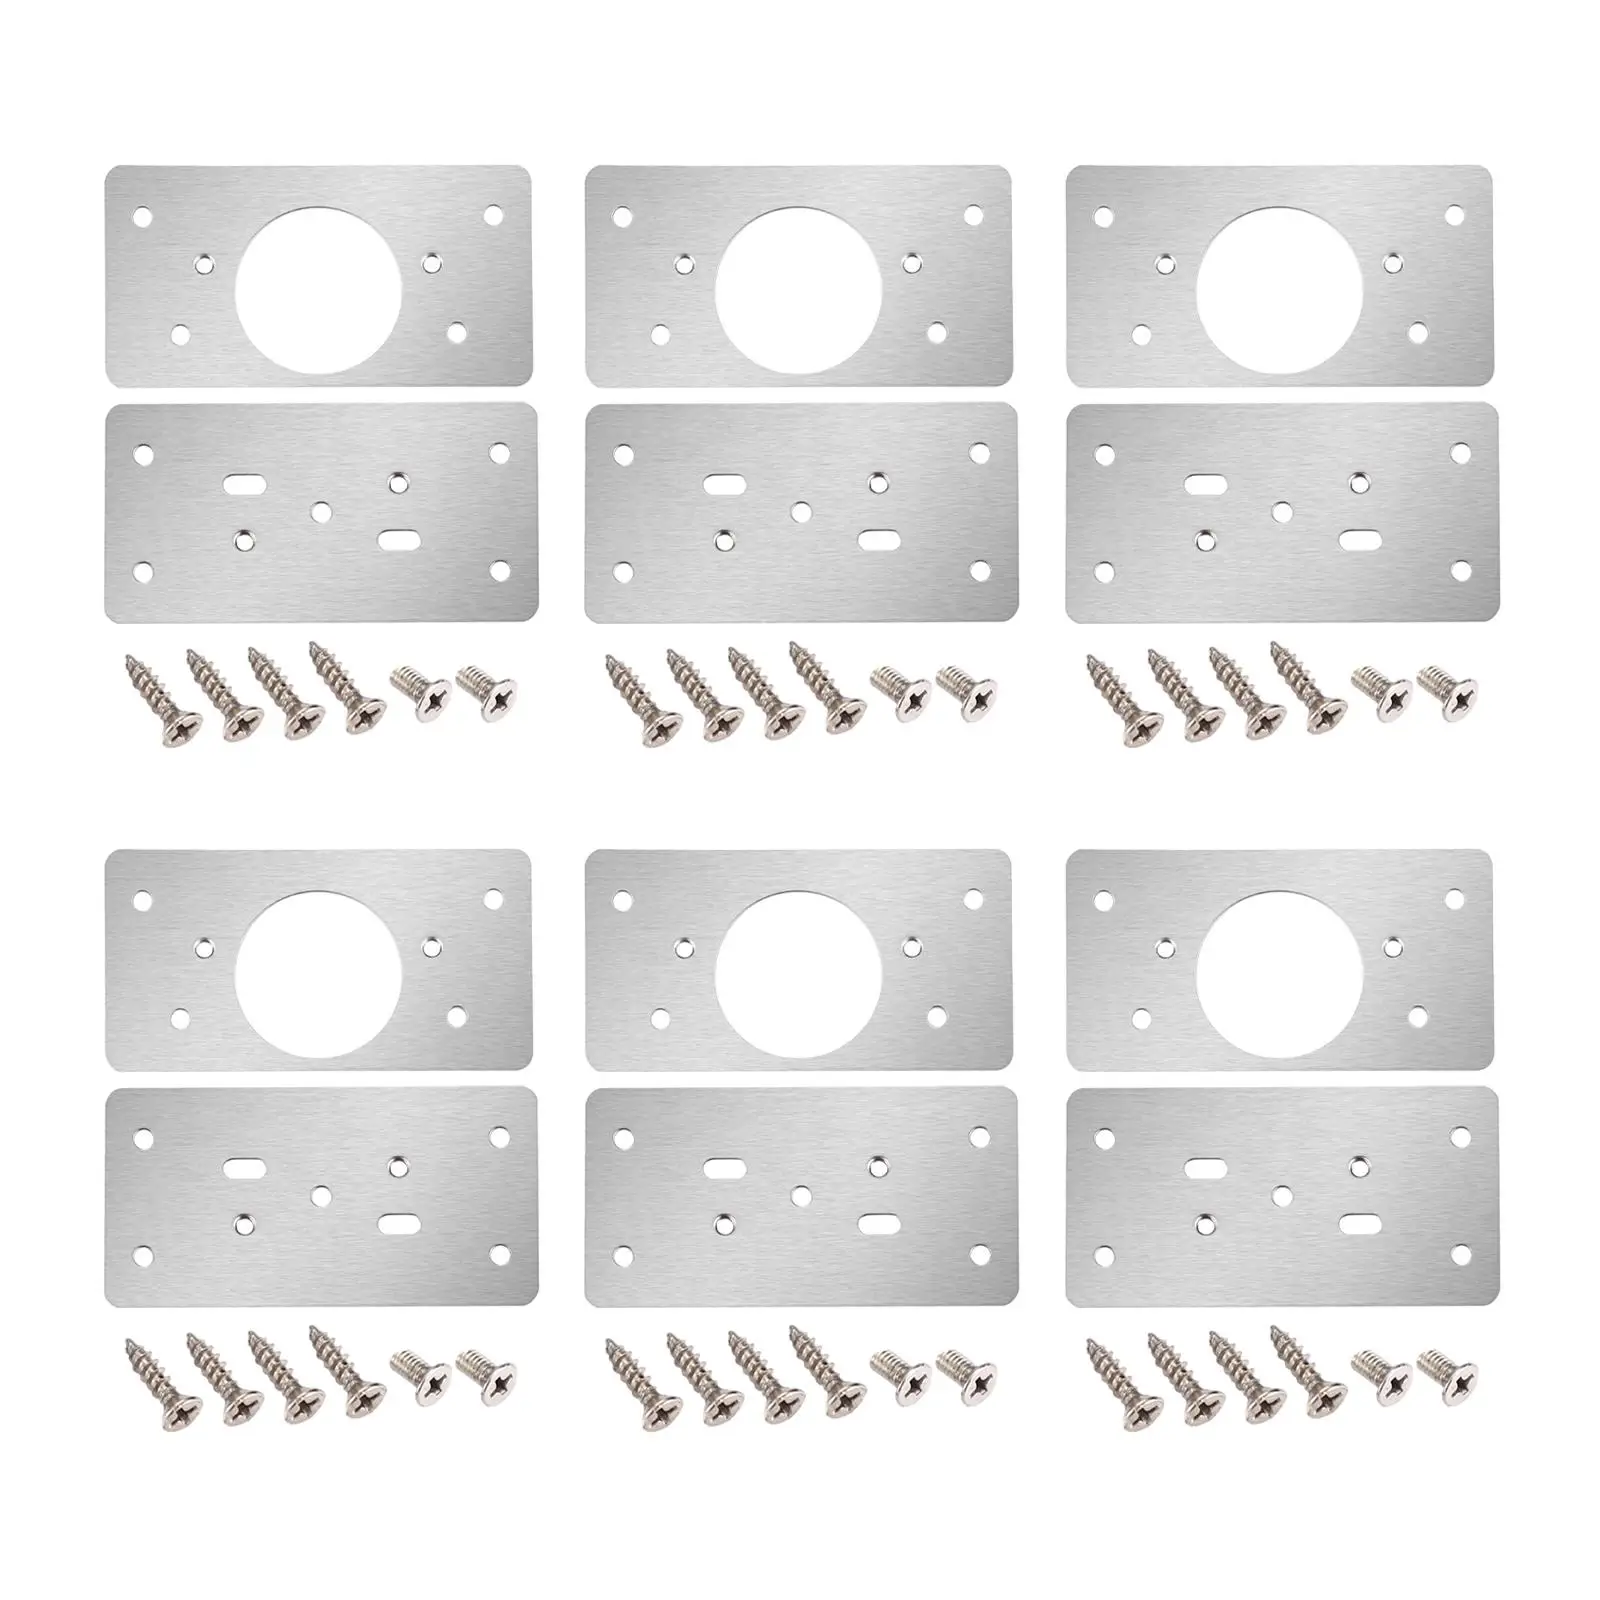 6Pcs Hinge Repair Replacement Kits Hinges Fixing Plates with Mounting Screws for